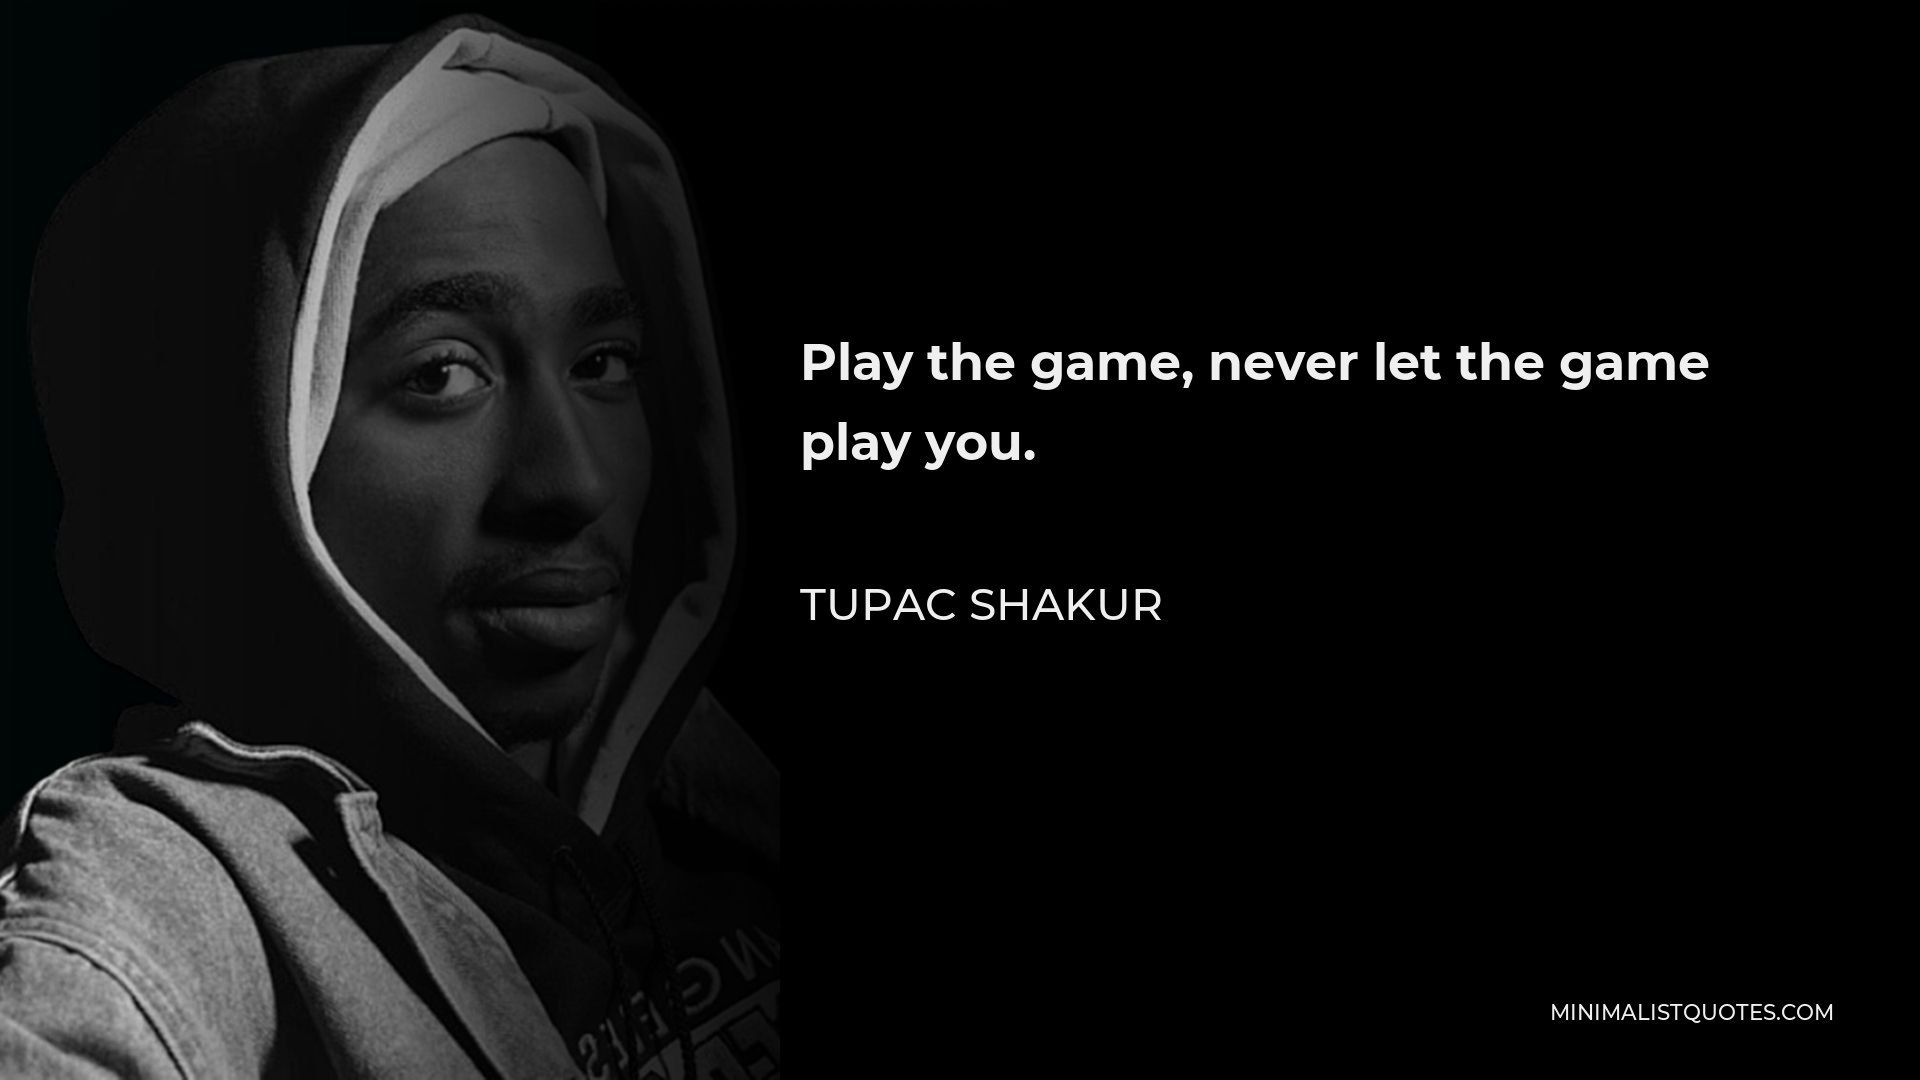 Tupac Shakur Quote: “Play the game, never let the game play you.”